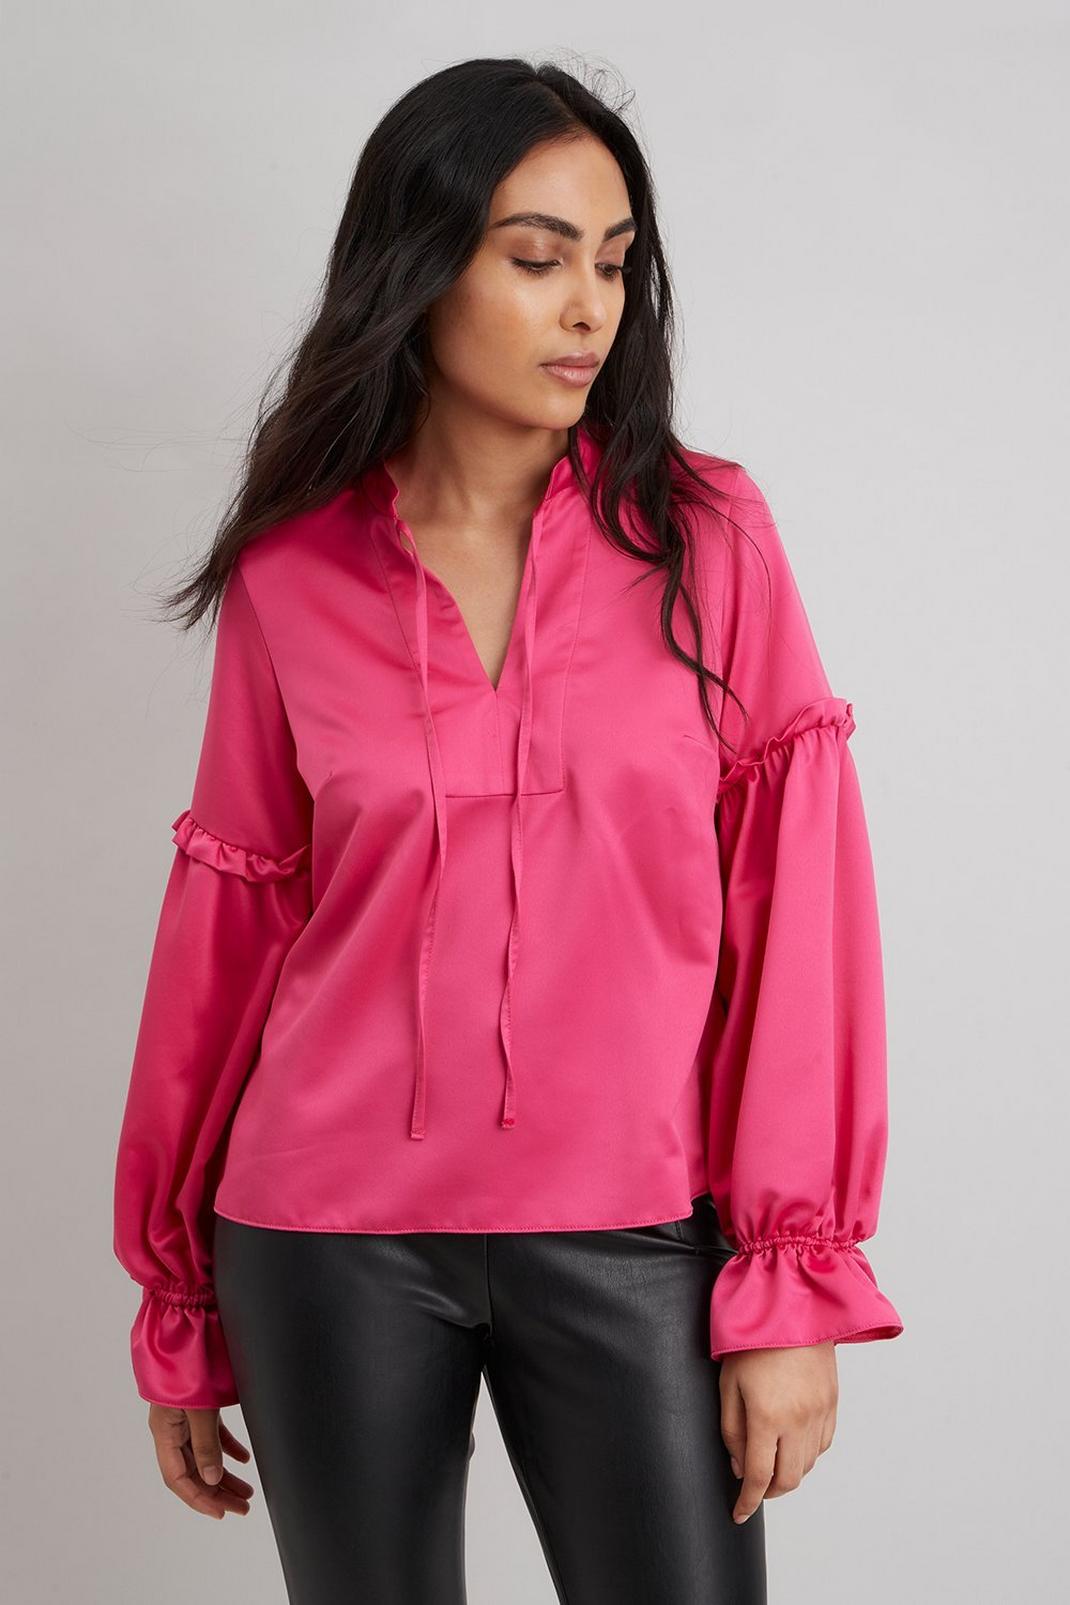 Hot pink Petite Pink Volume Frill Long Sleeve Top image number 1